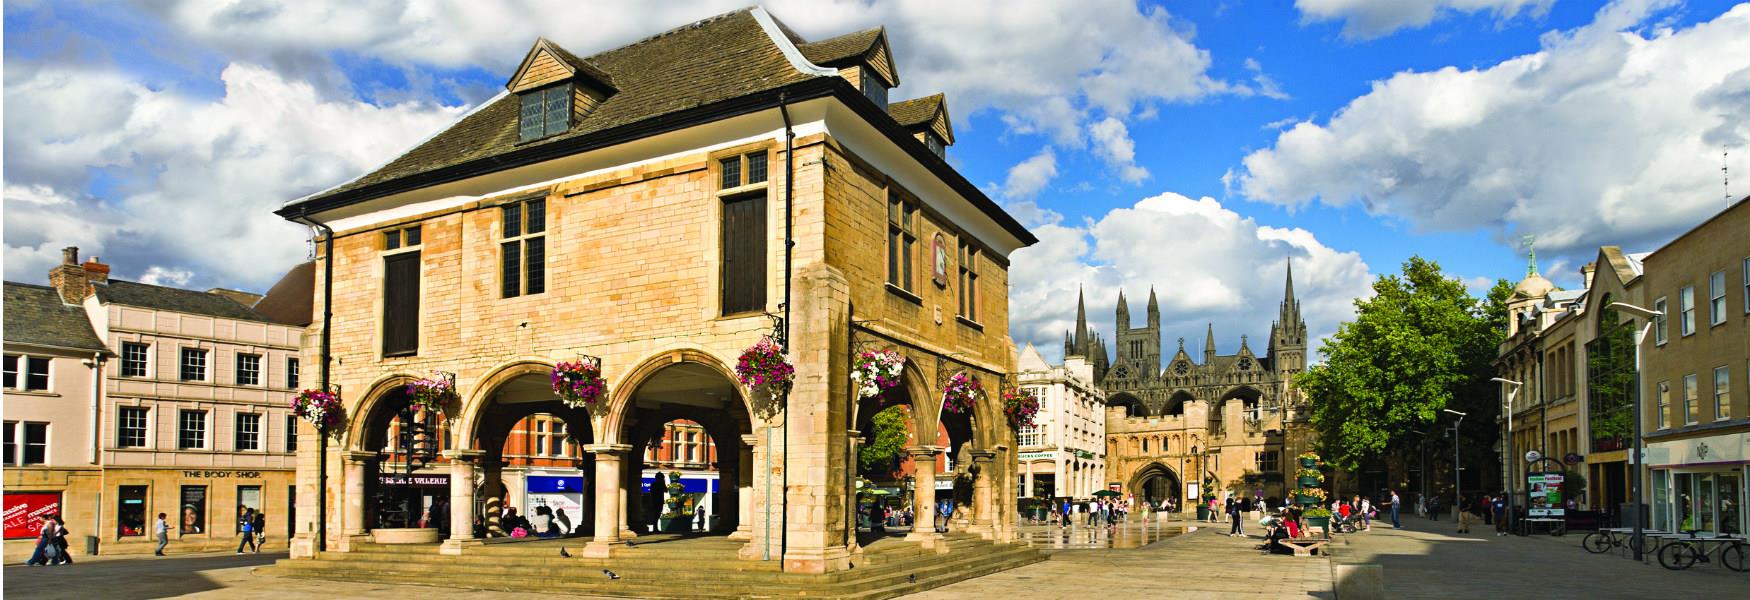 Image of the Peterborough Guild Hall in Cathedral Square